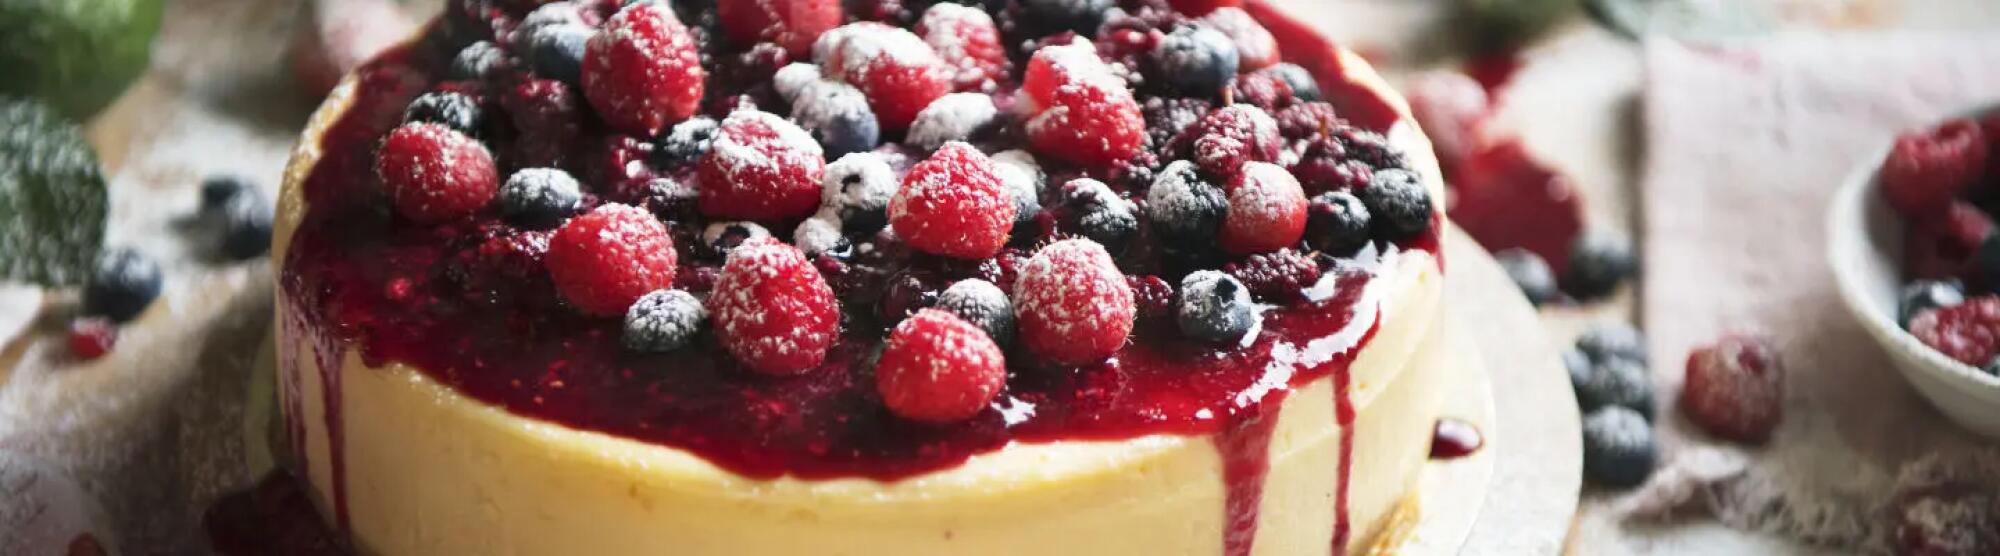 Recette : Cheesecake aux speculoos et fruits rouges